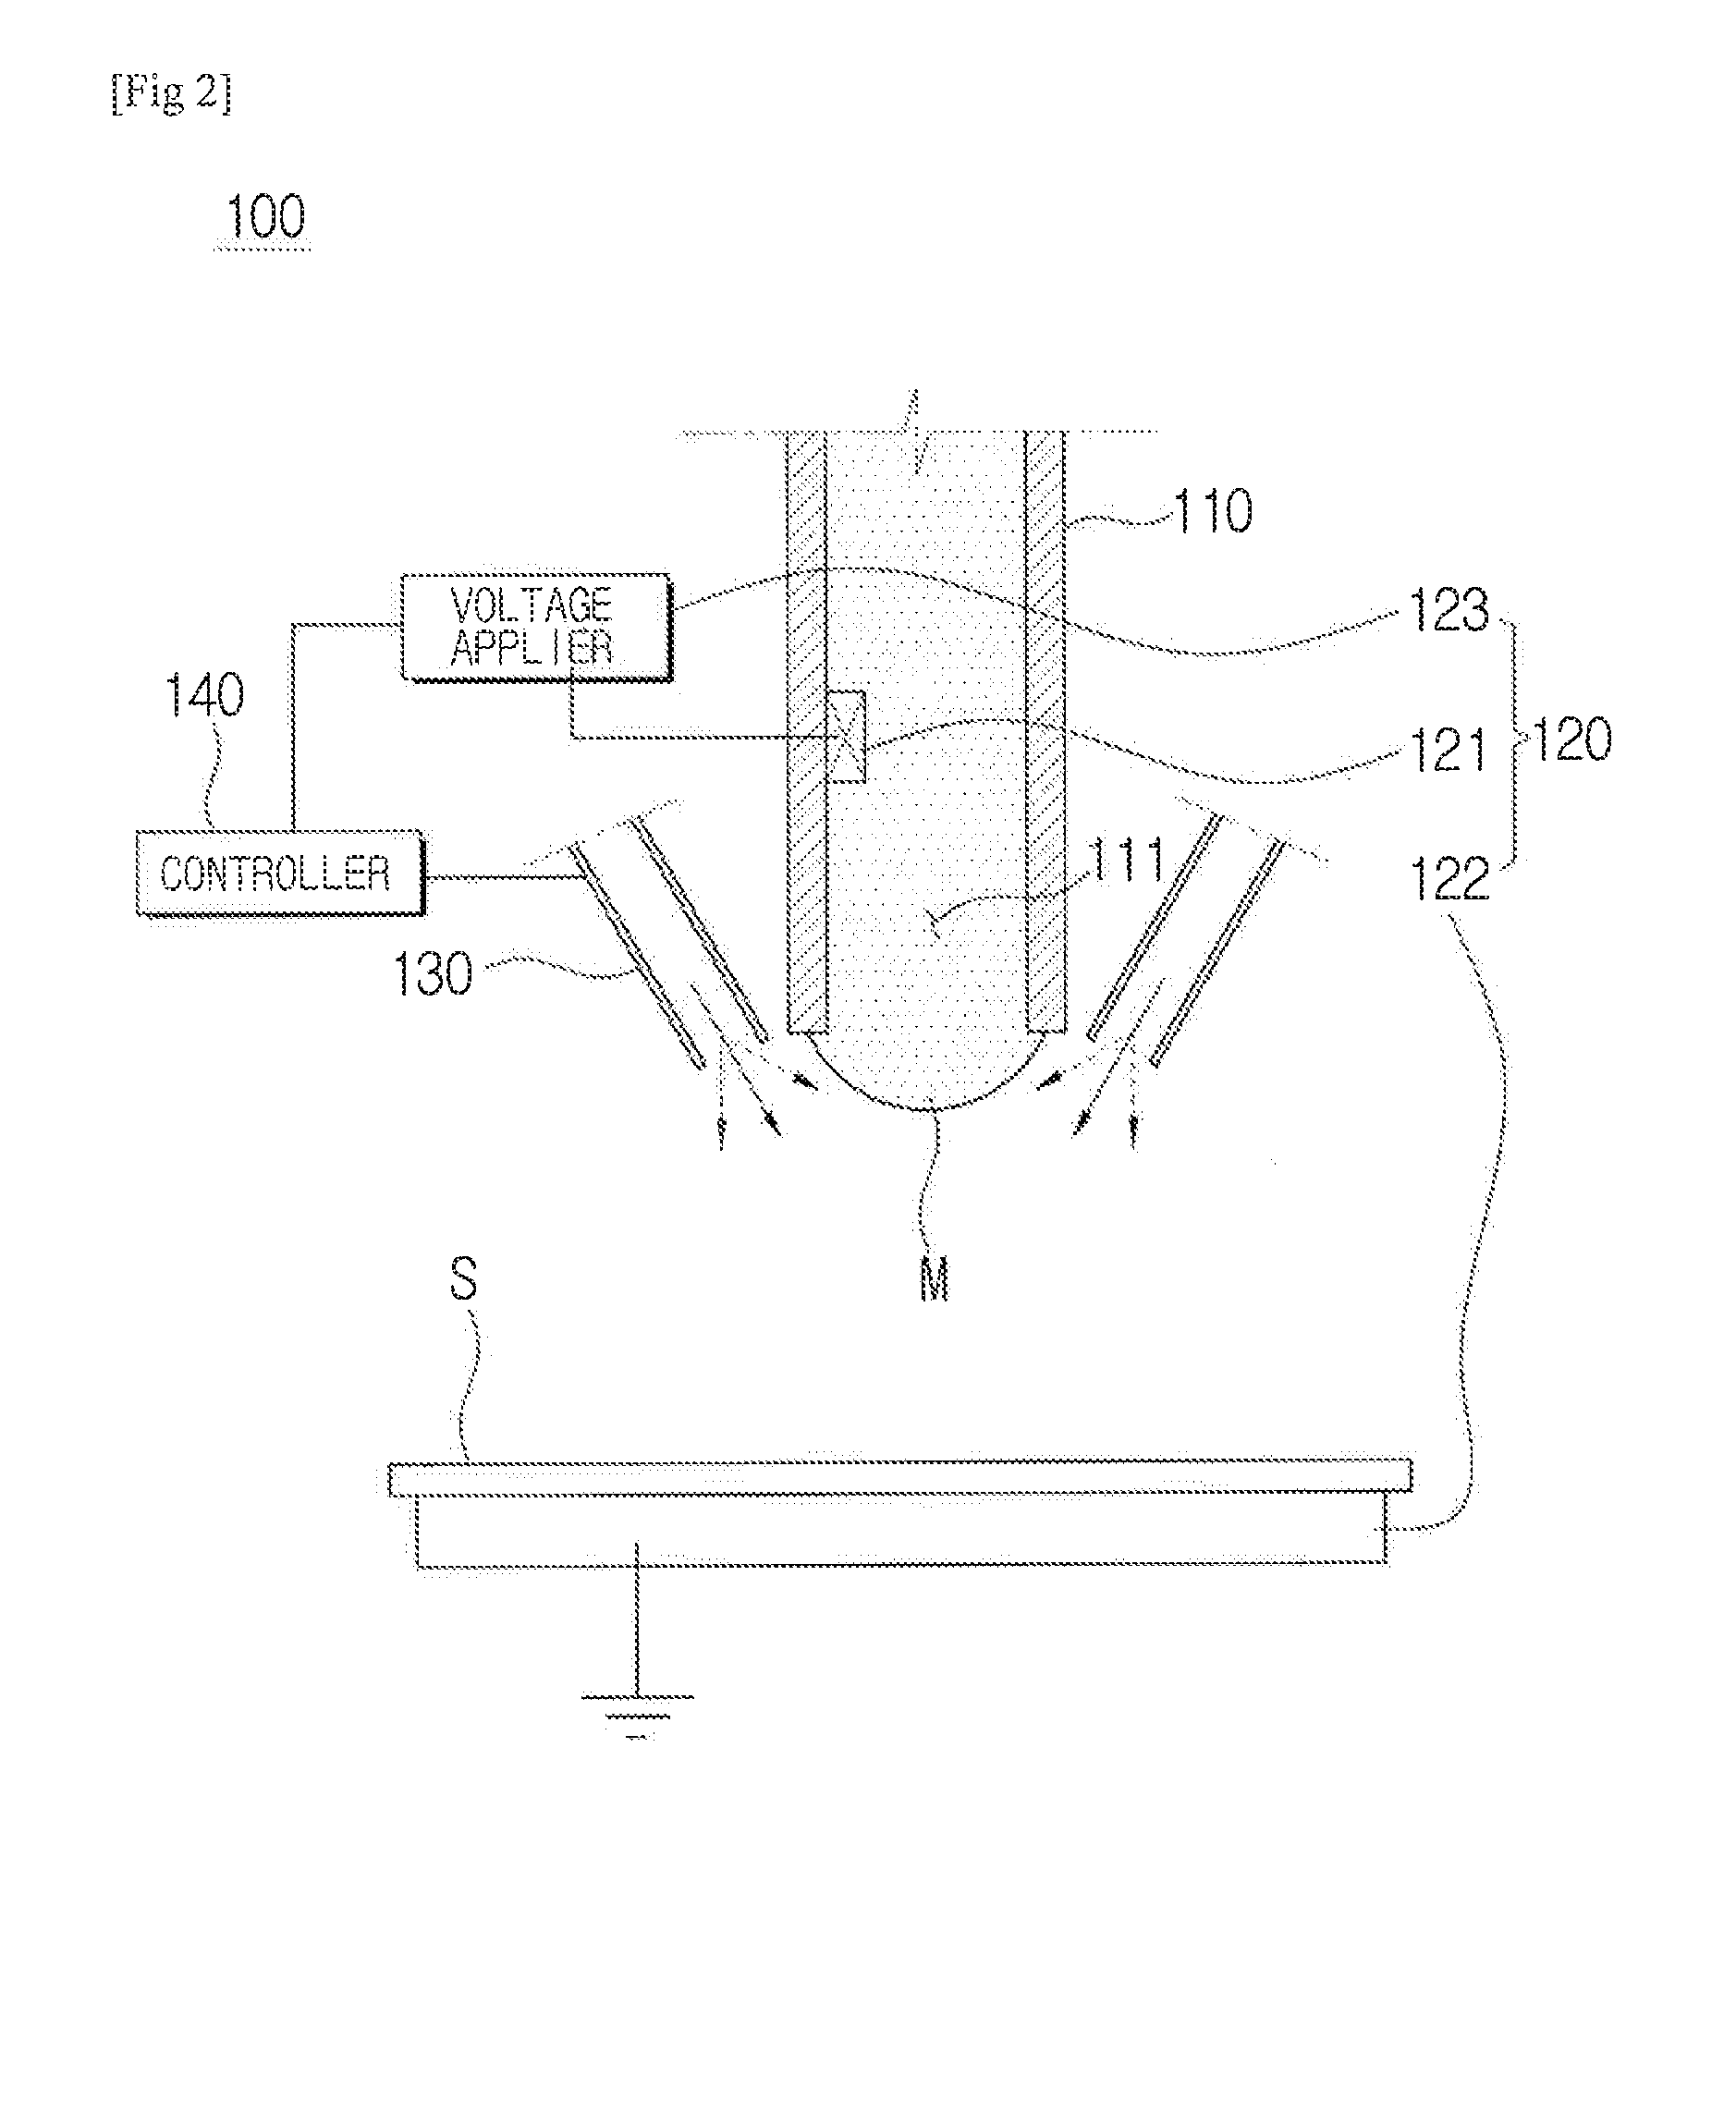 Device for Discharging Ink Using Electrostatic Force